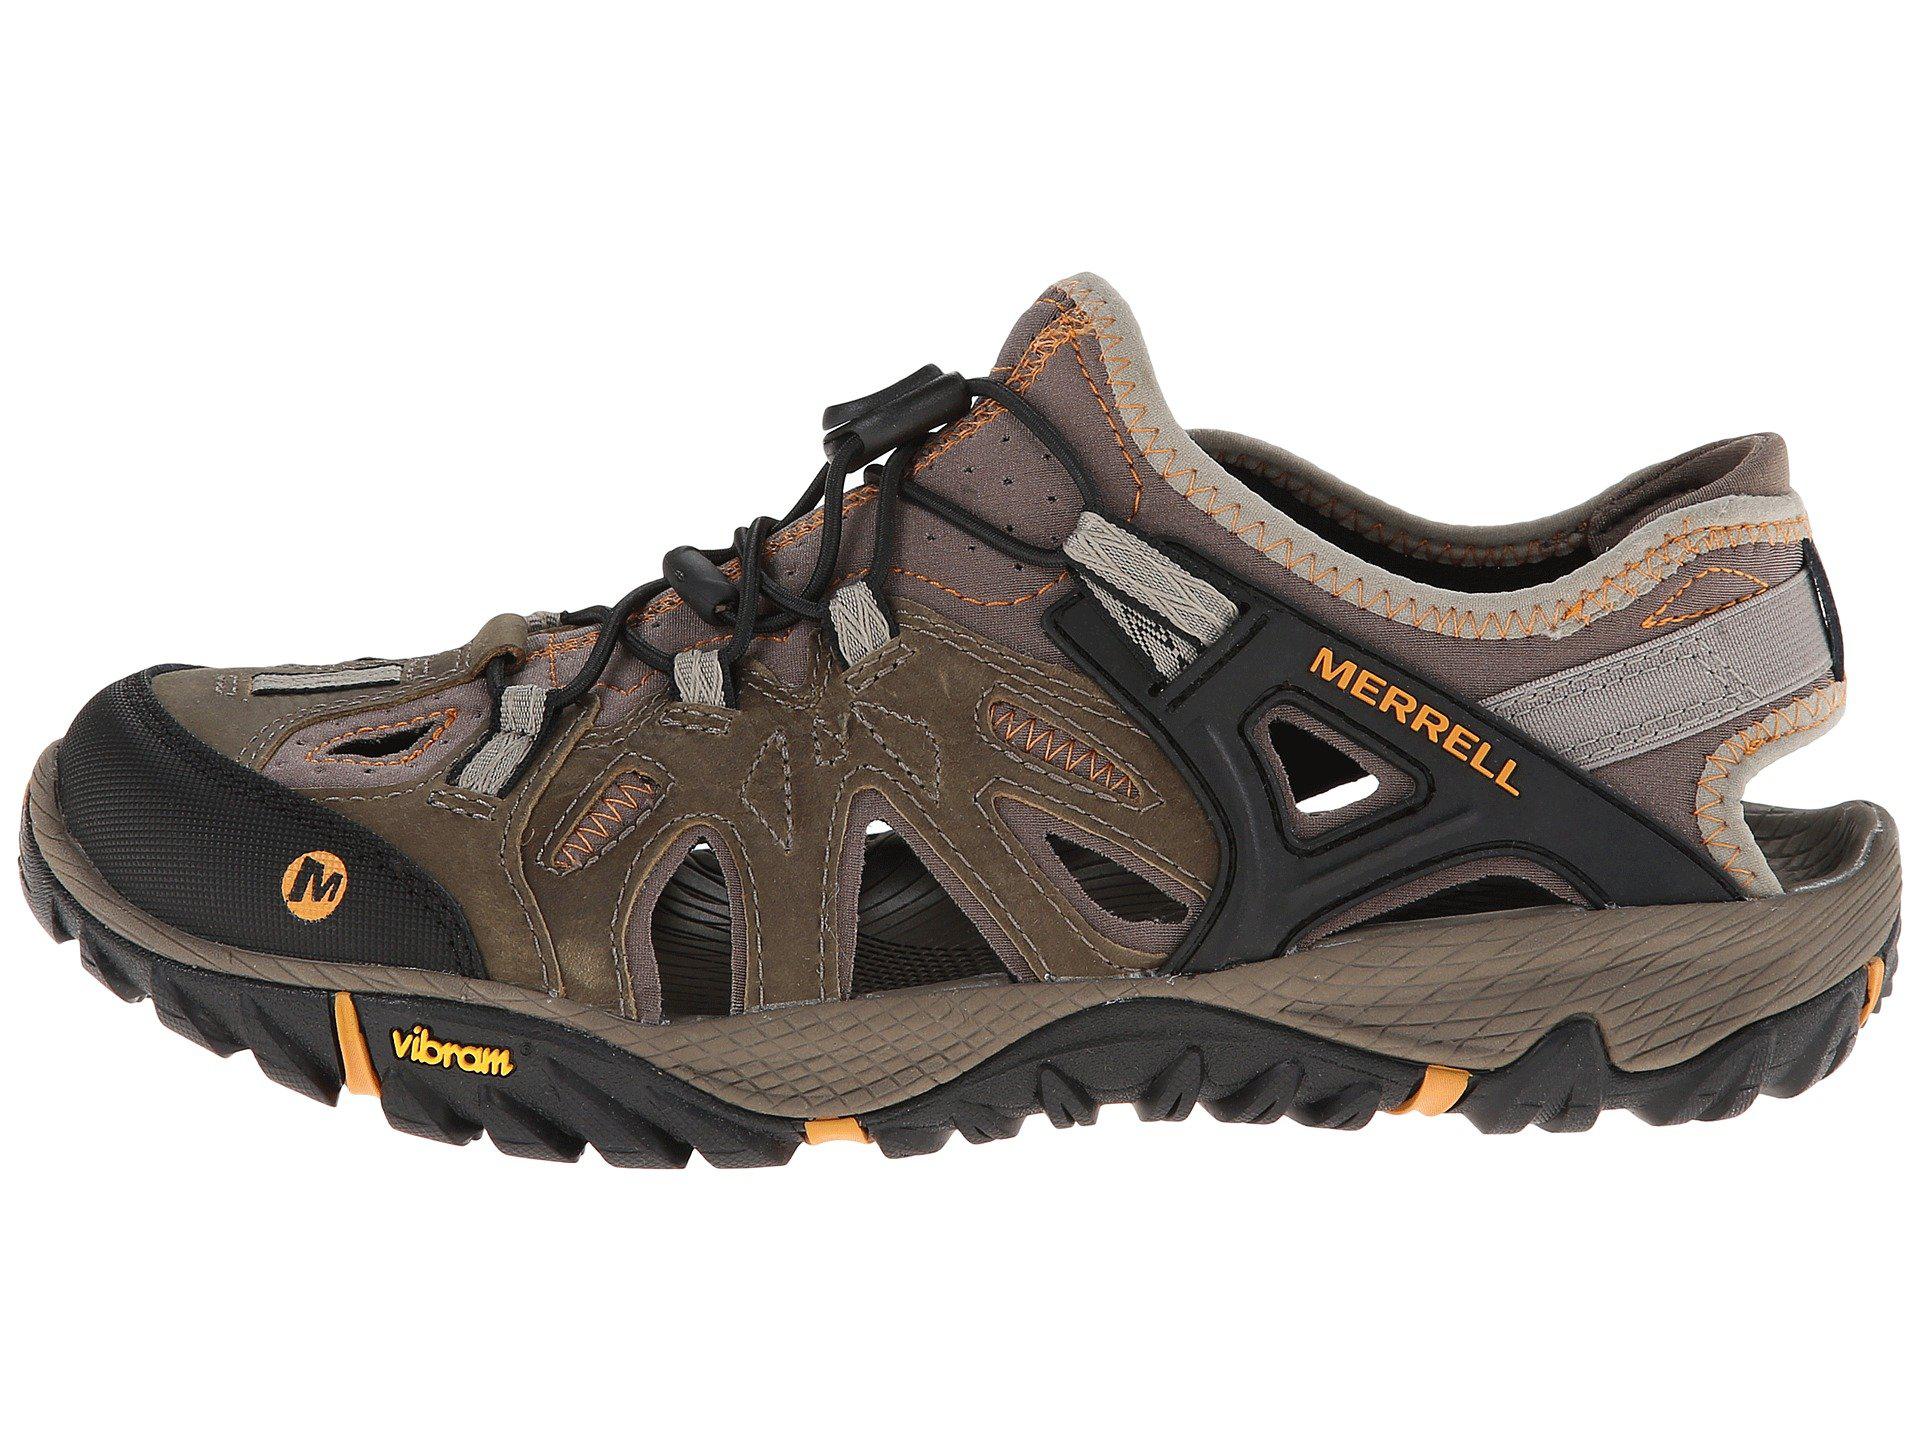 Lyst - Merrell All Out Blaze Sieve in Brown for Men